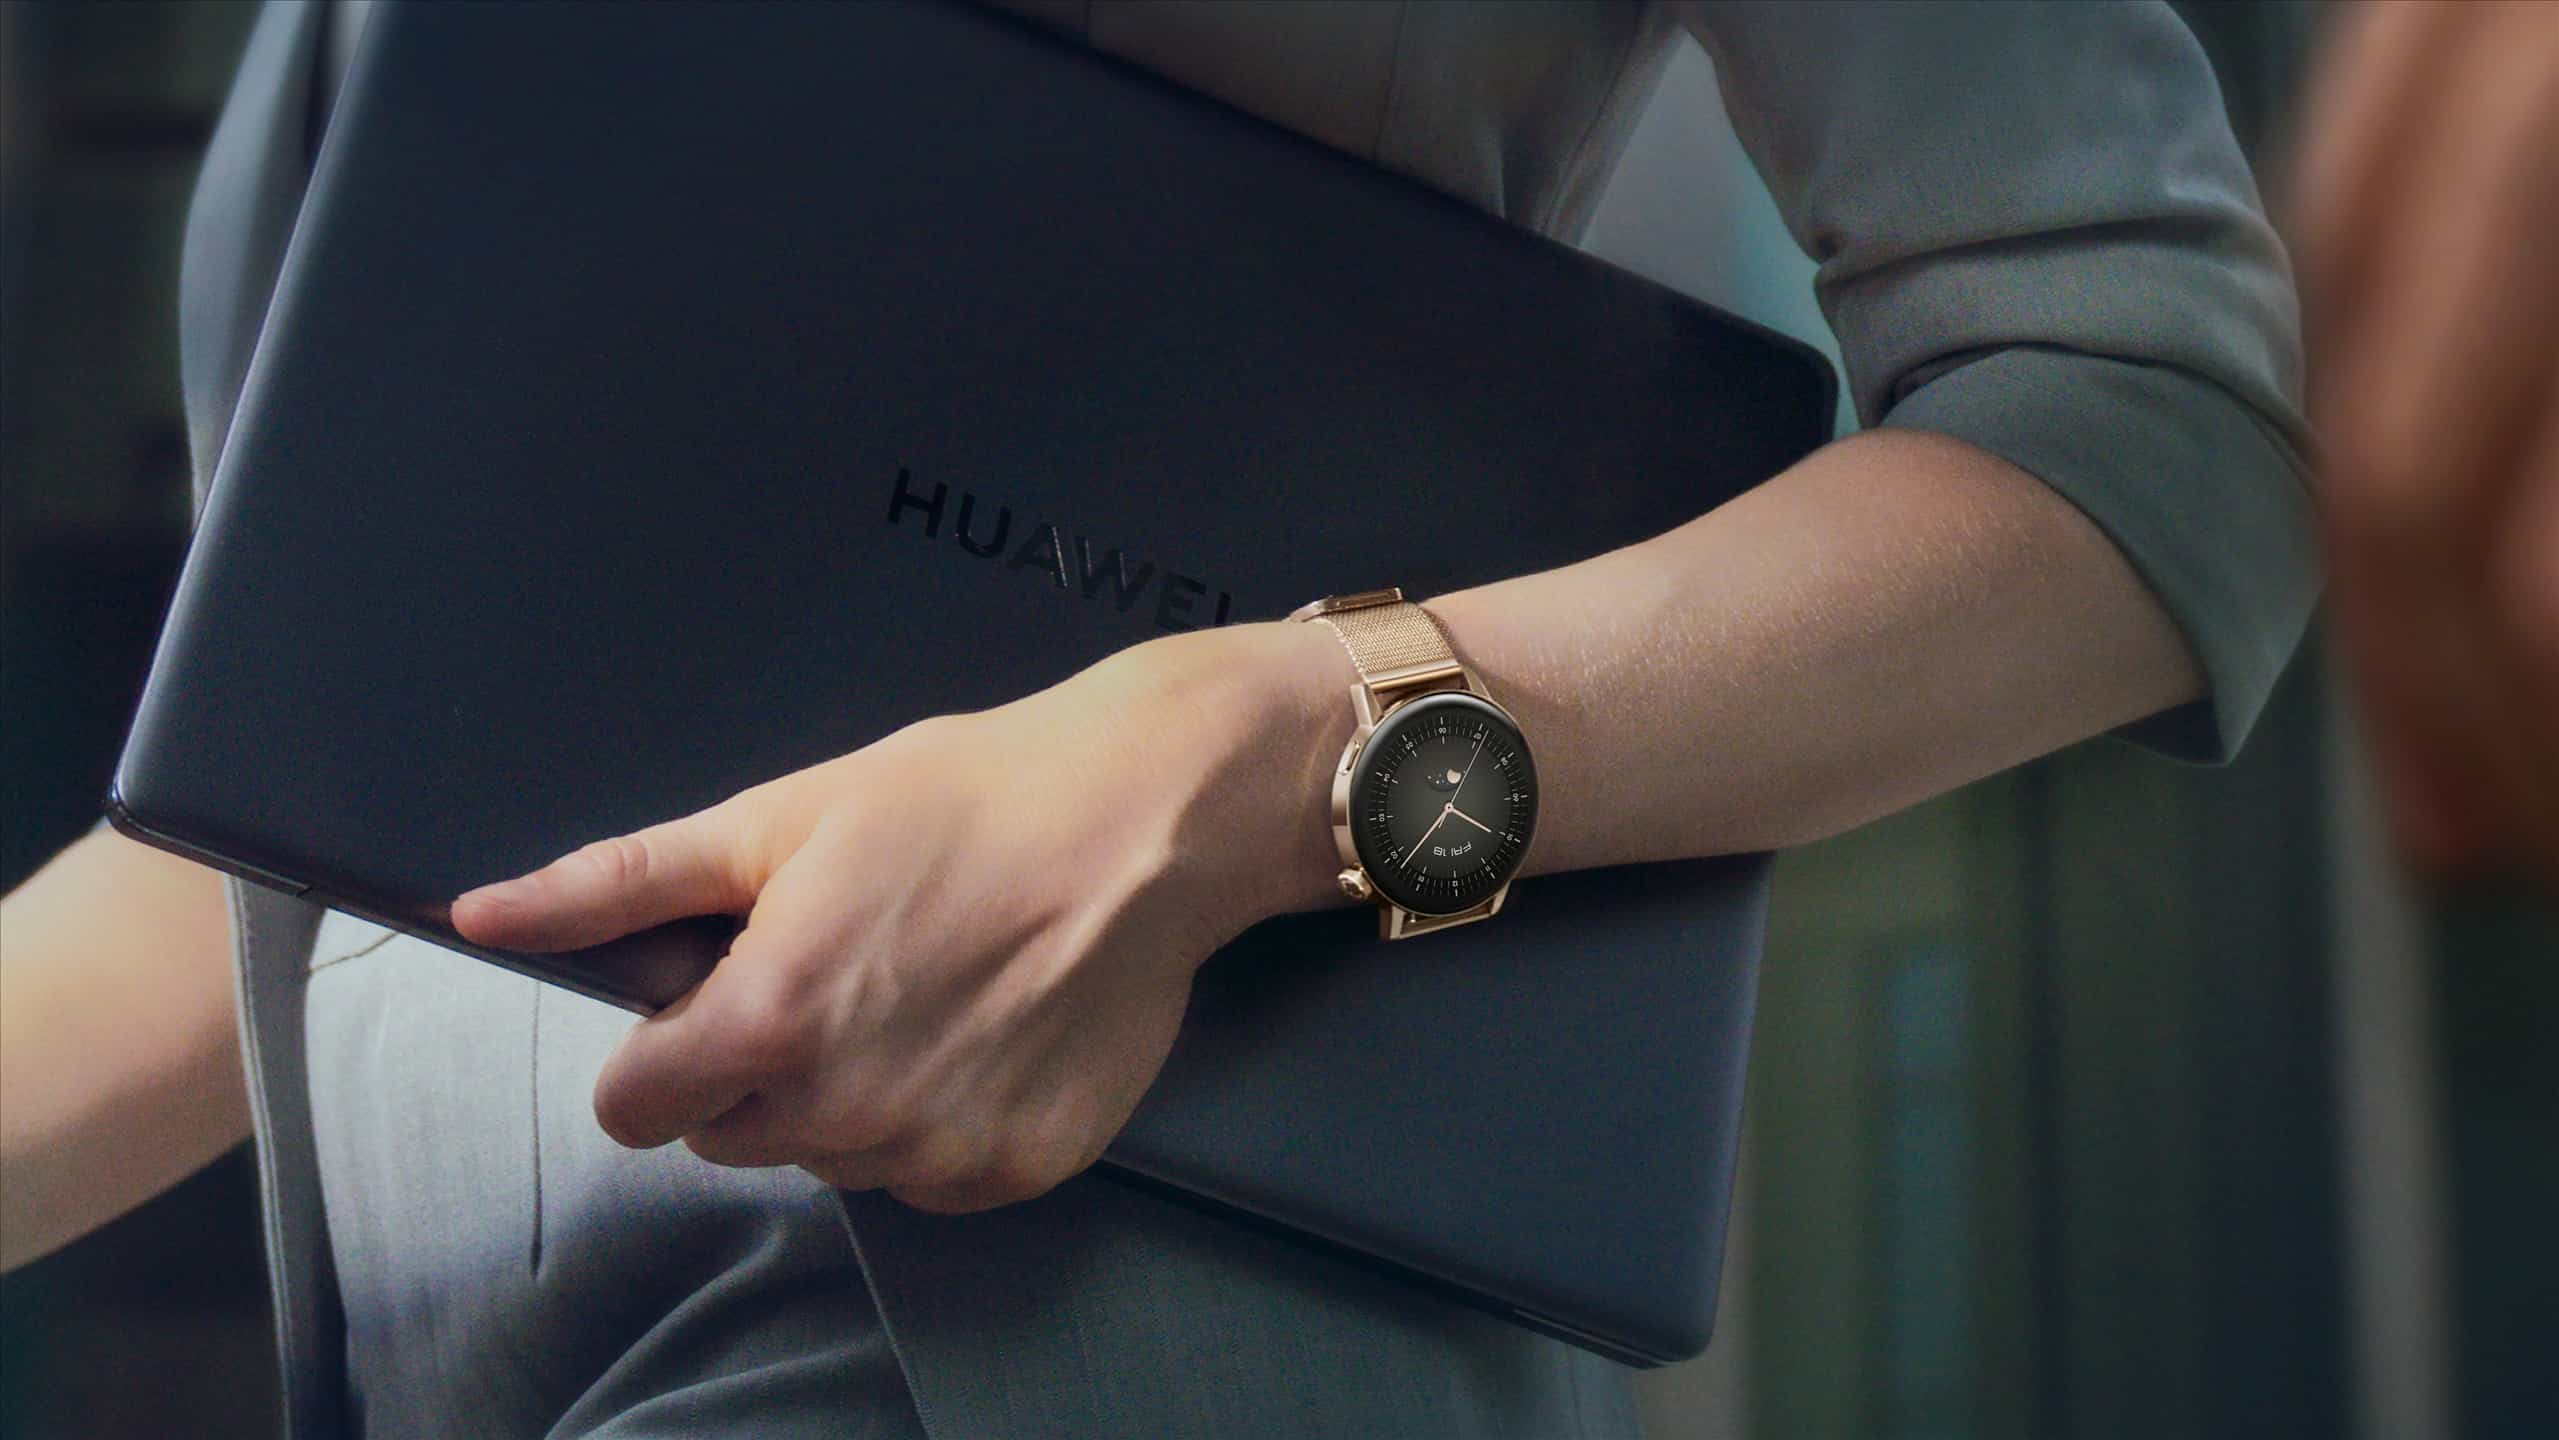 HUAWEI launches their latest flagship smartwatches, the WATCH GT 3 Series